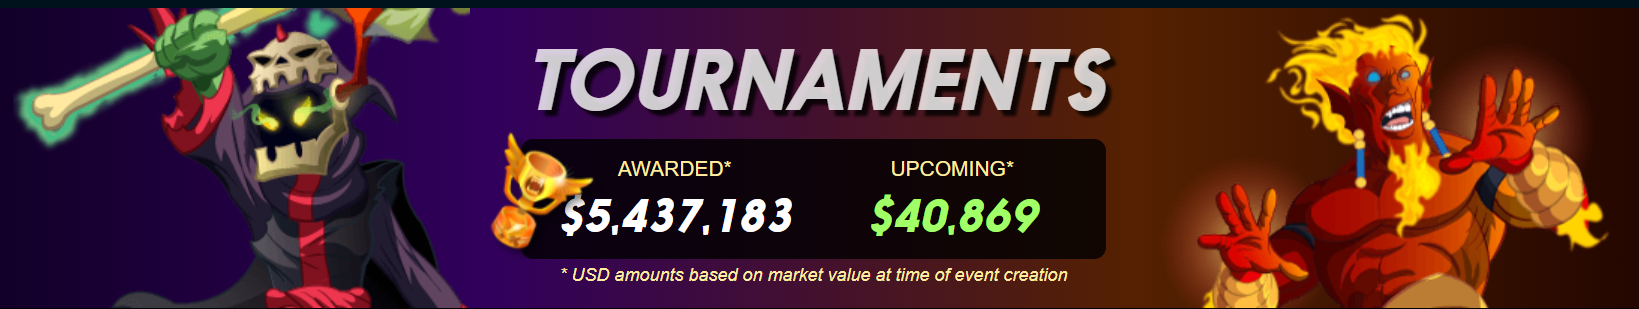 Tournament Homepage.png